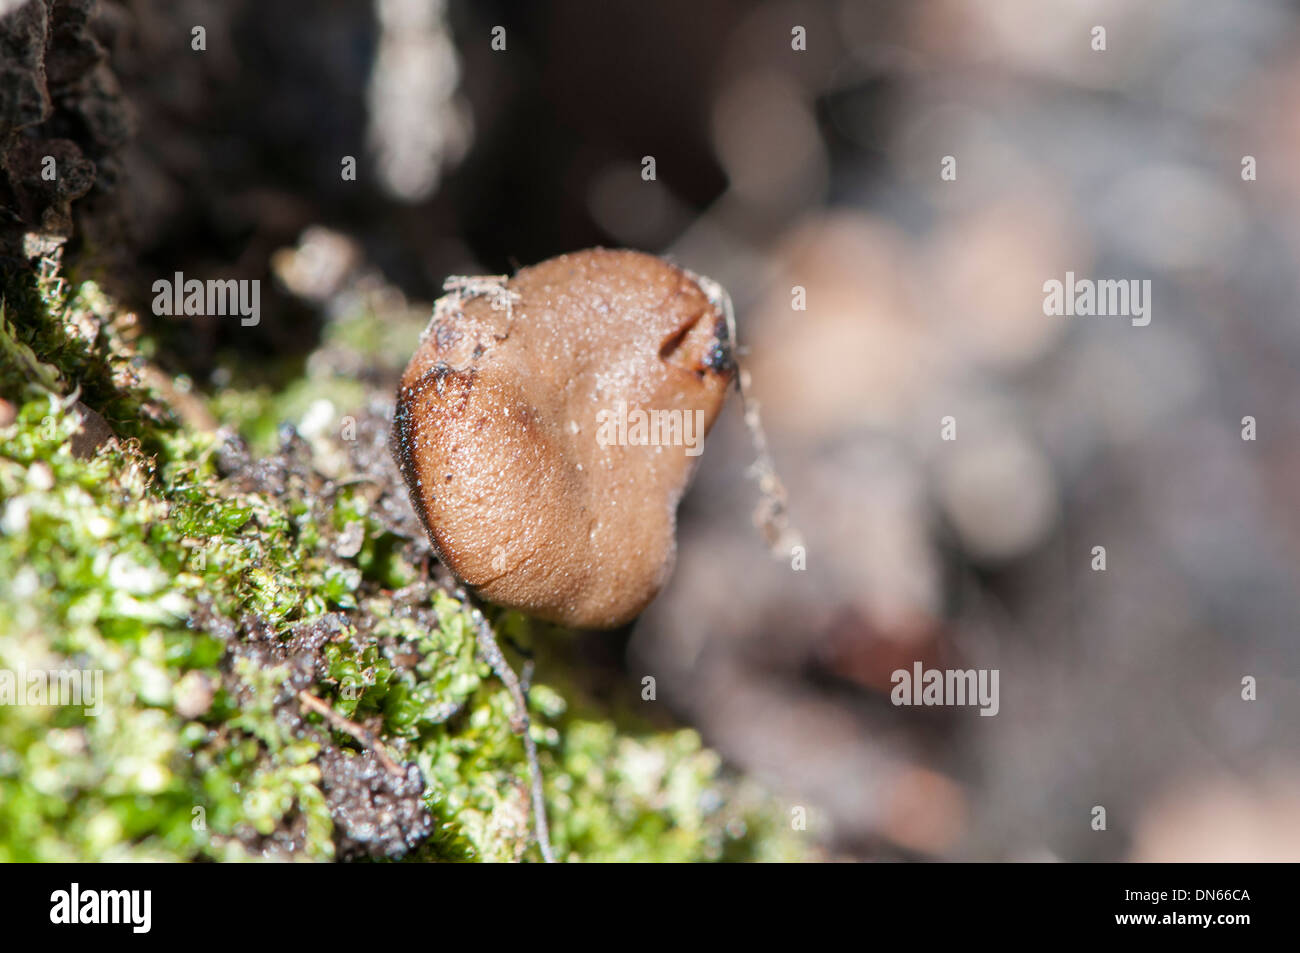 mushroom hidden in a tree surrounded by moss Stock Photo